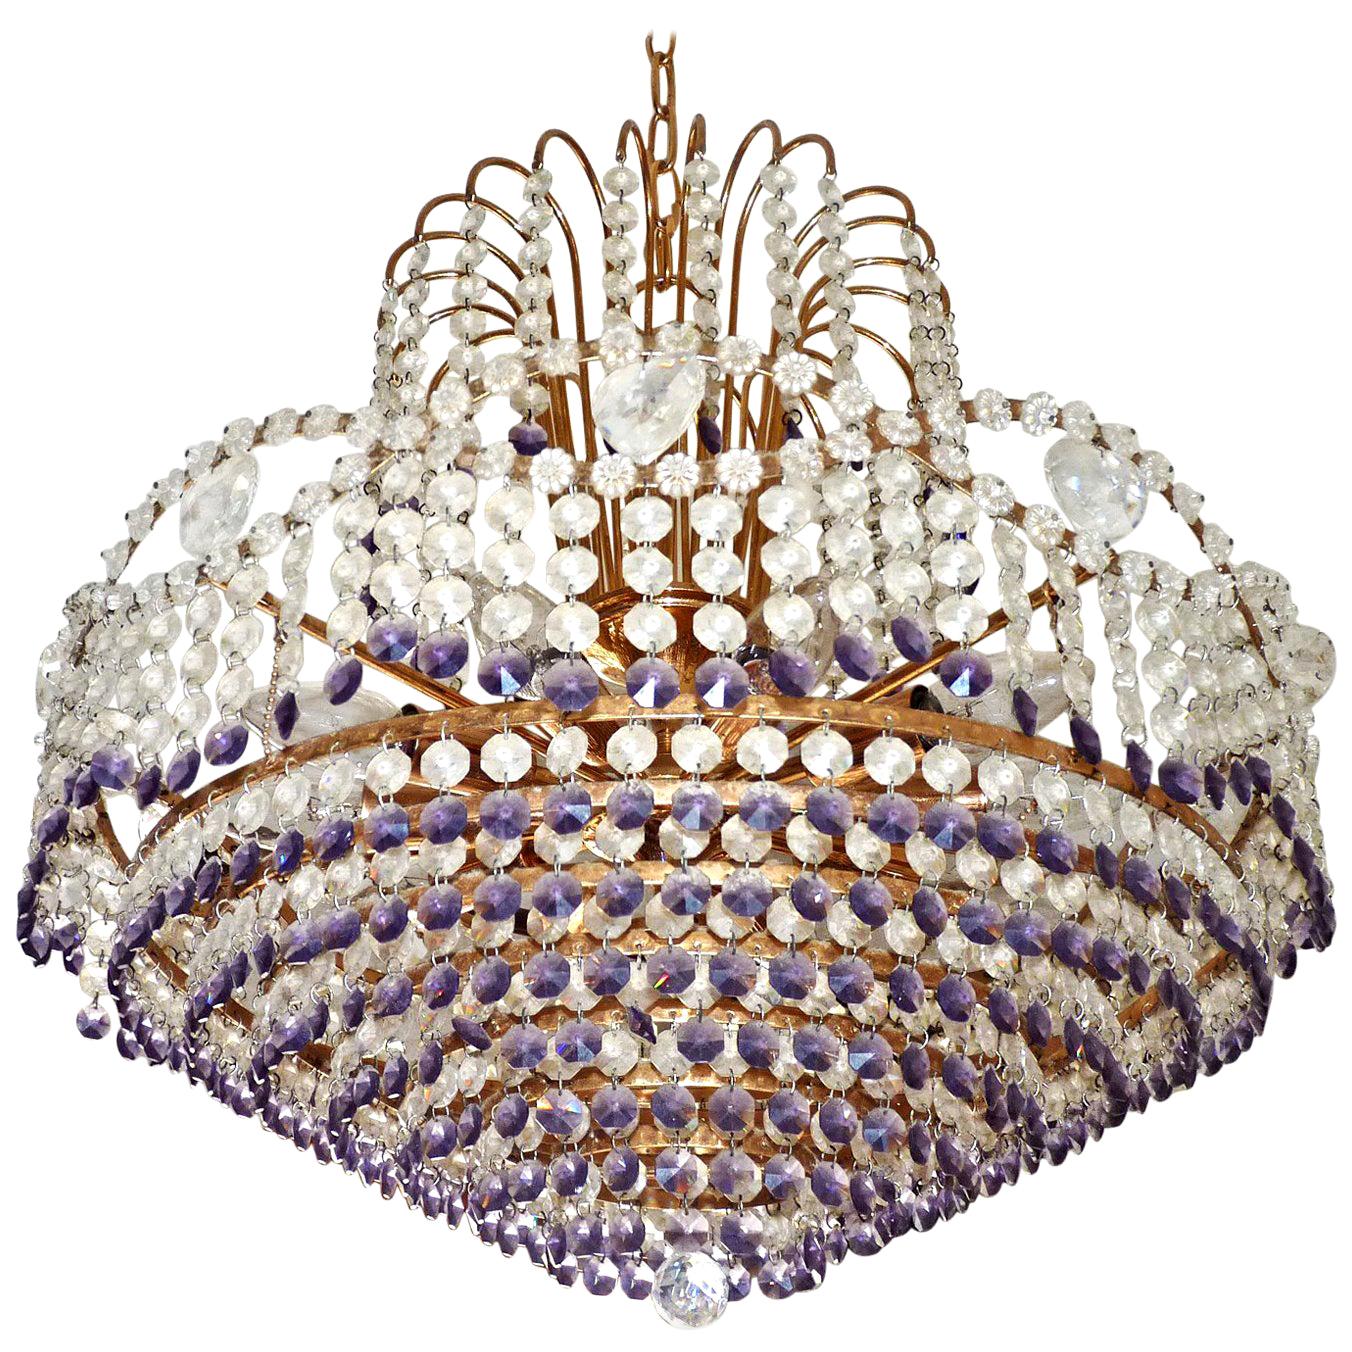 Stunning French Hollywood Regency Empire amethyst cut crystal and gilt brass 10-light chandelier with crystal drops and swags
Measures:
Diameter 21.3 in/ 54 cm
Height 37.8 in / 96 cm
Weight 18 lb/8 Kg
Ten light bulbs E14/ good working